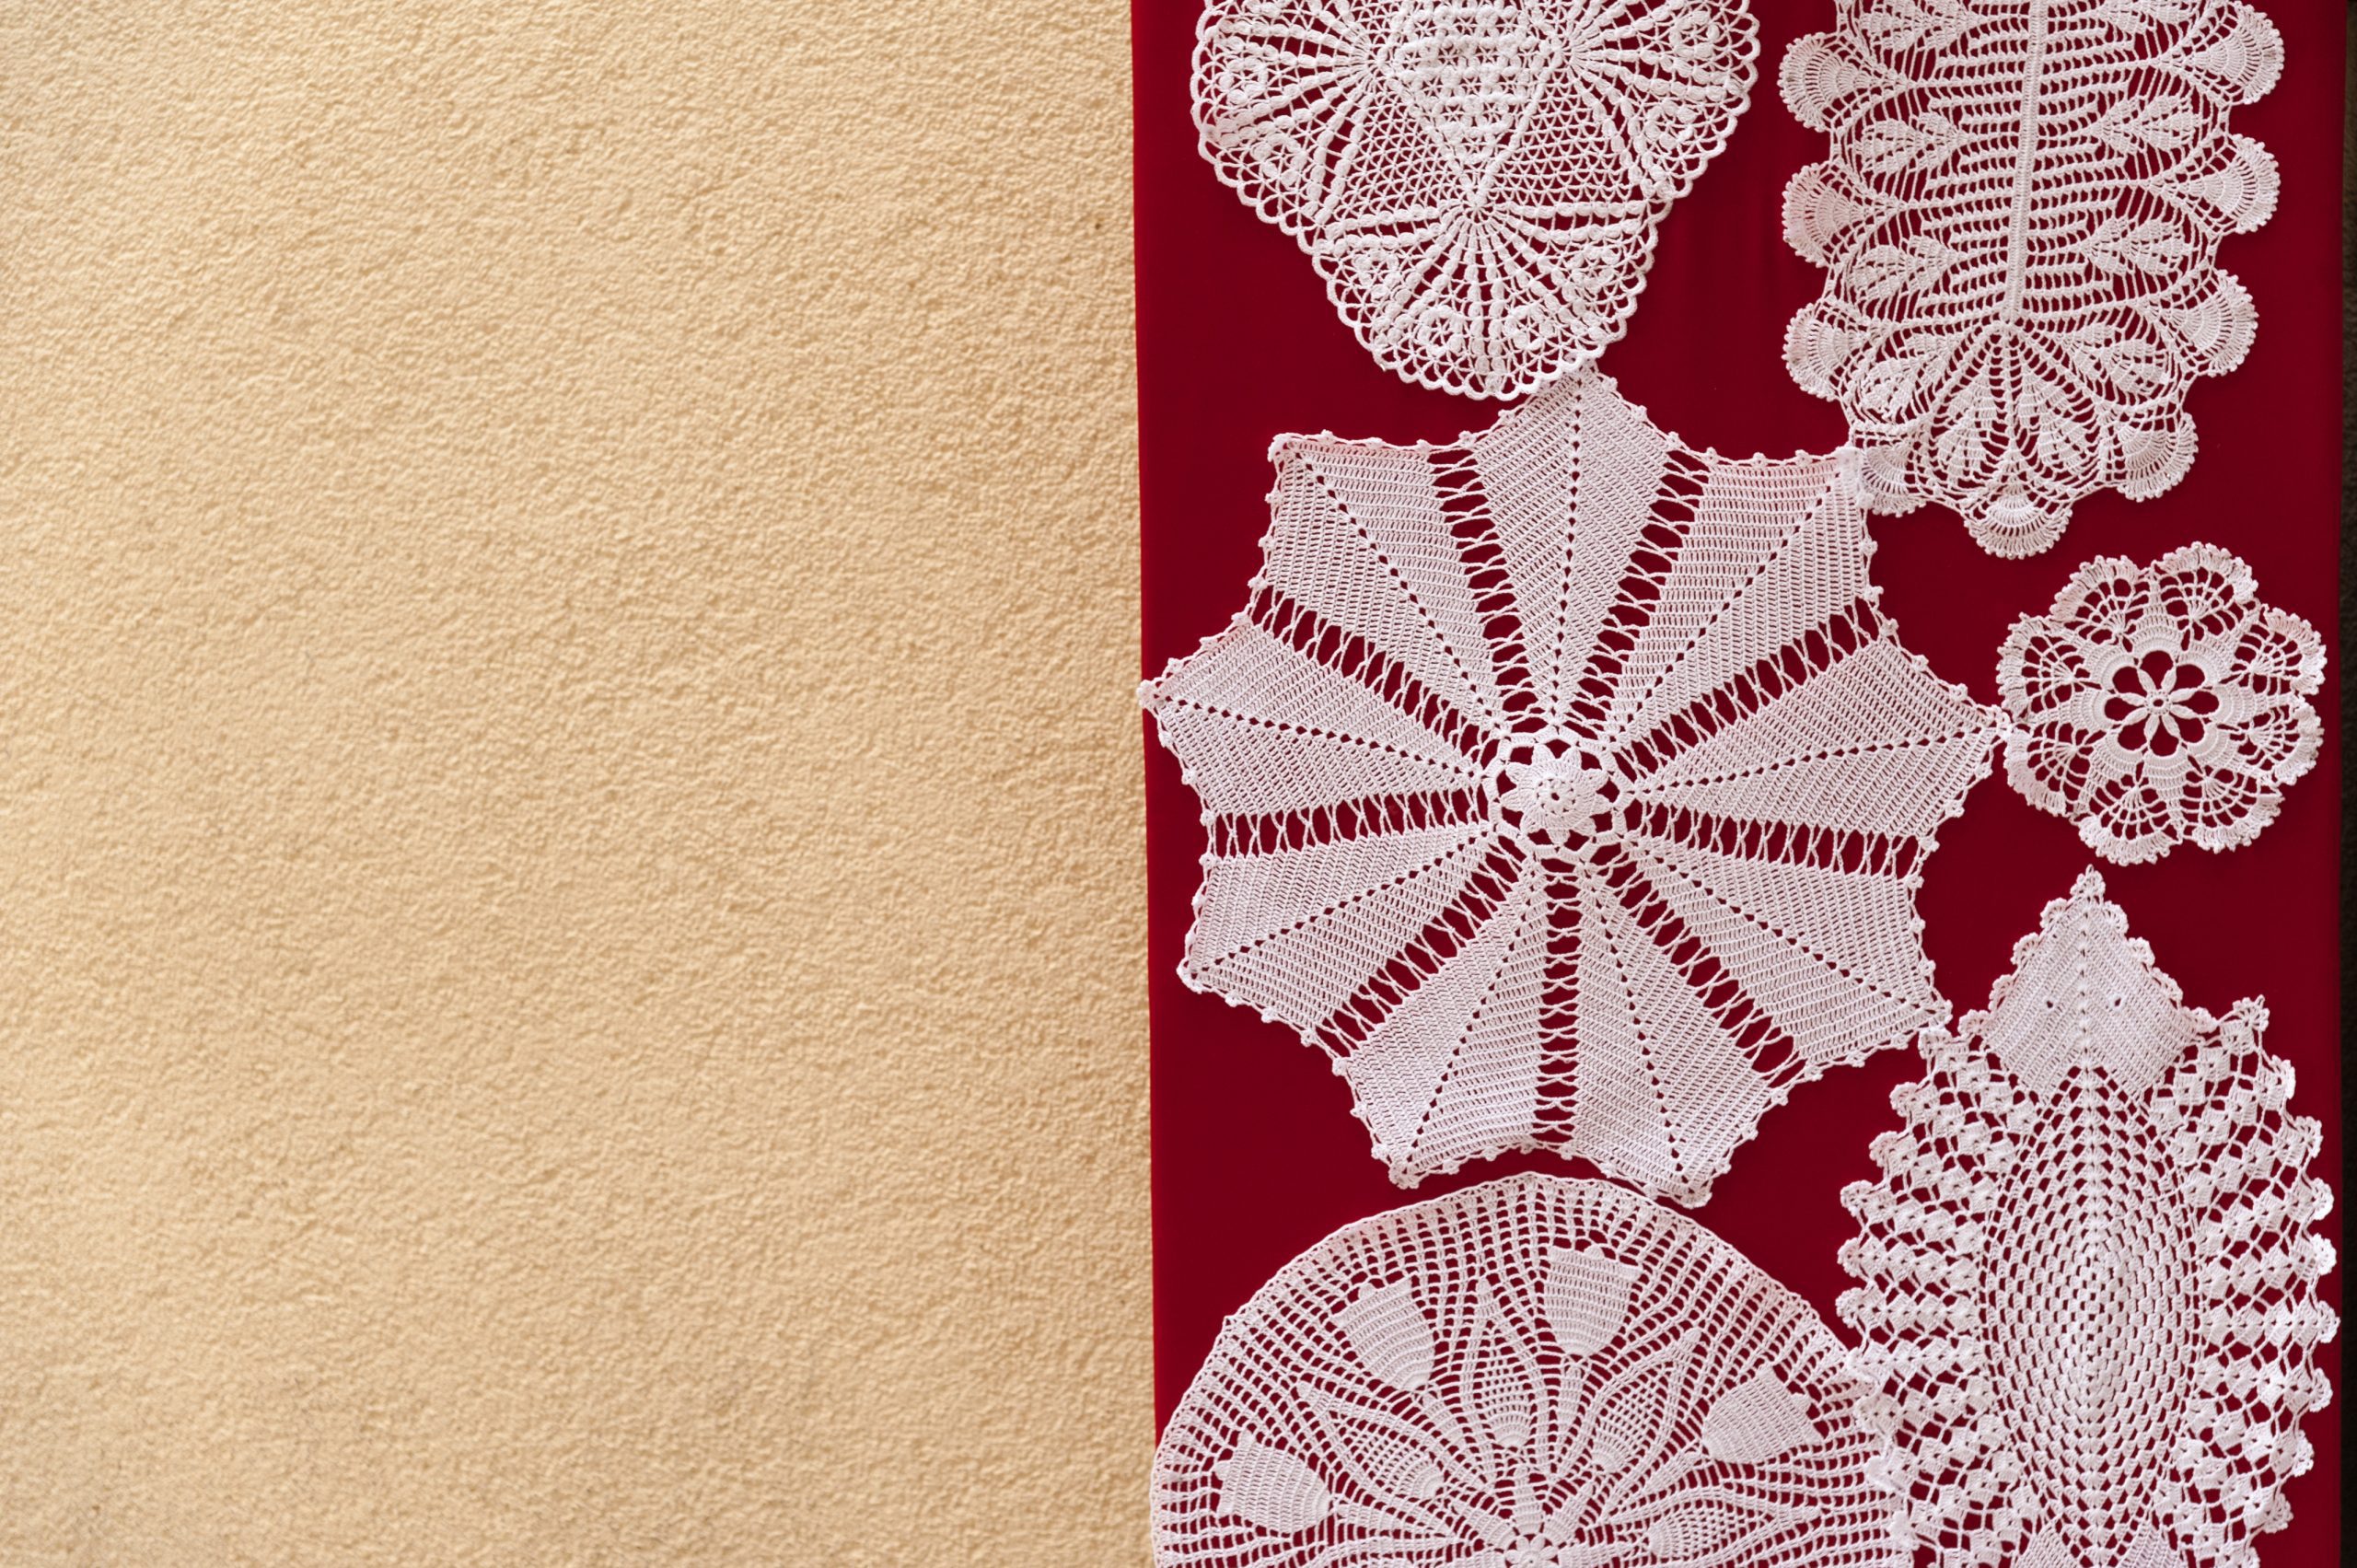 Unique handmade lacework from the island of Pag, Croatia